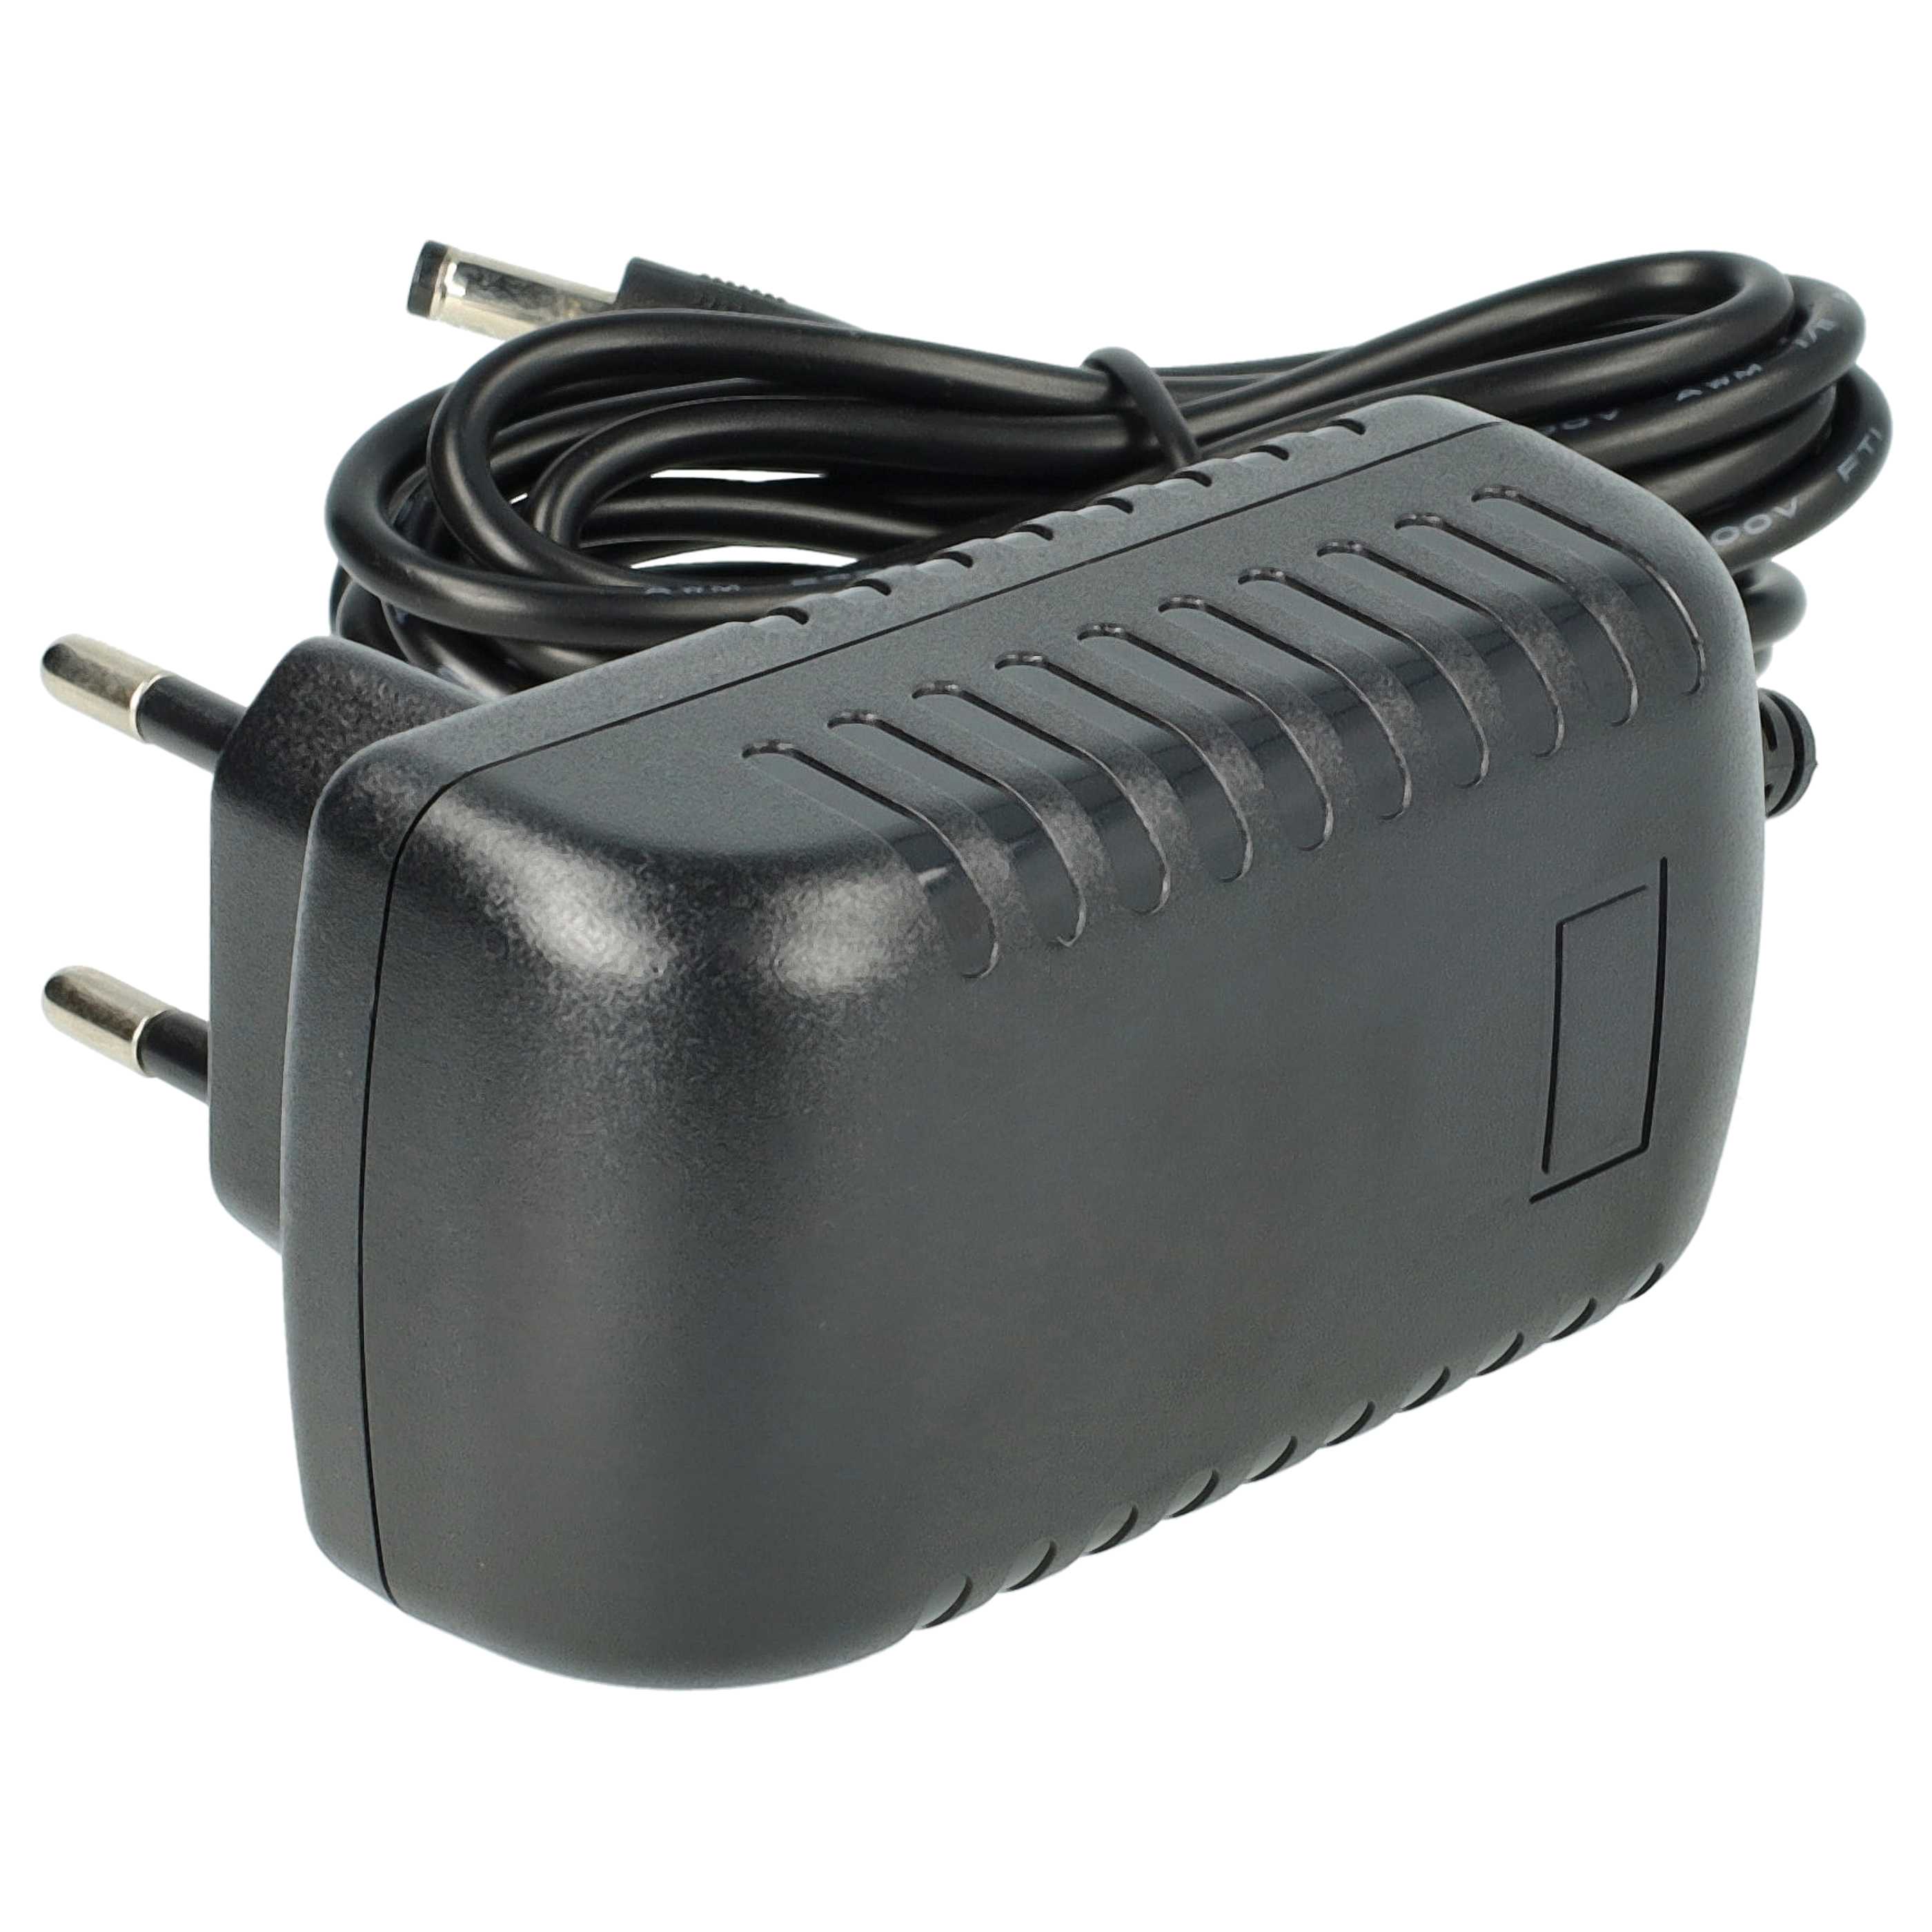 Mains Power Adapter replaces Asus AD5923090-OA00PW9100 for AsusNotebook, 24 W